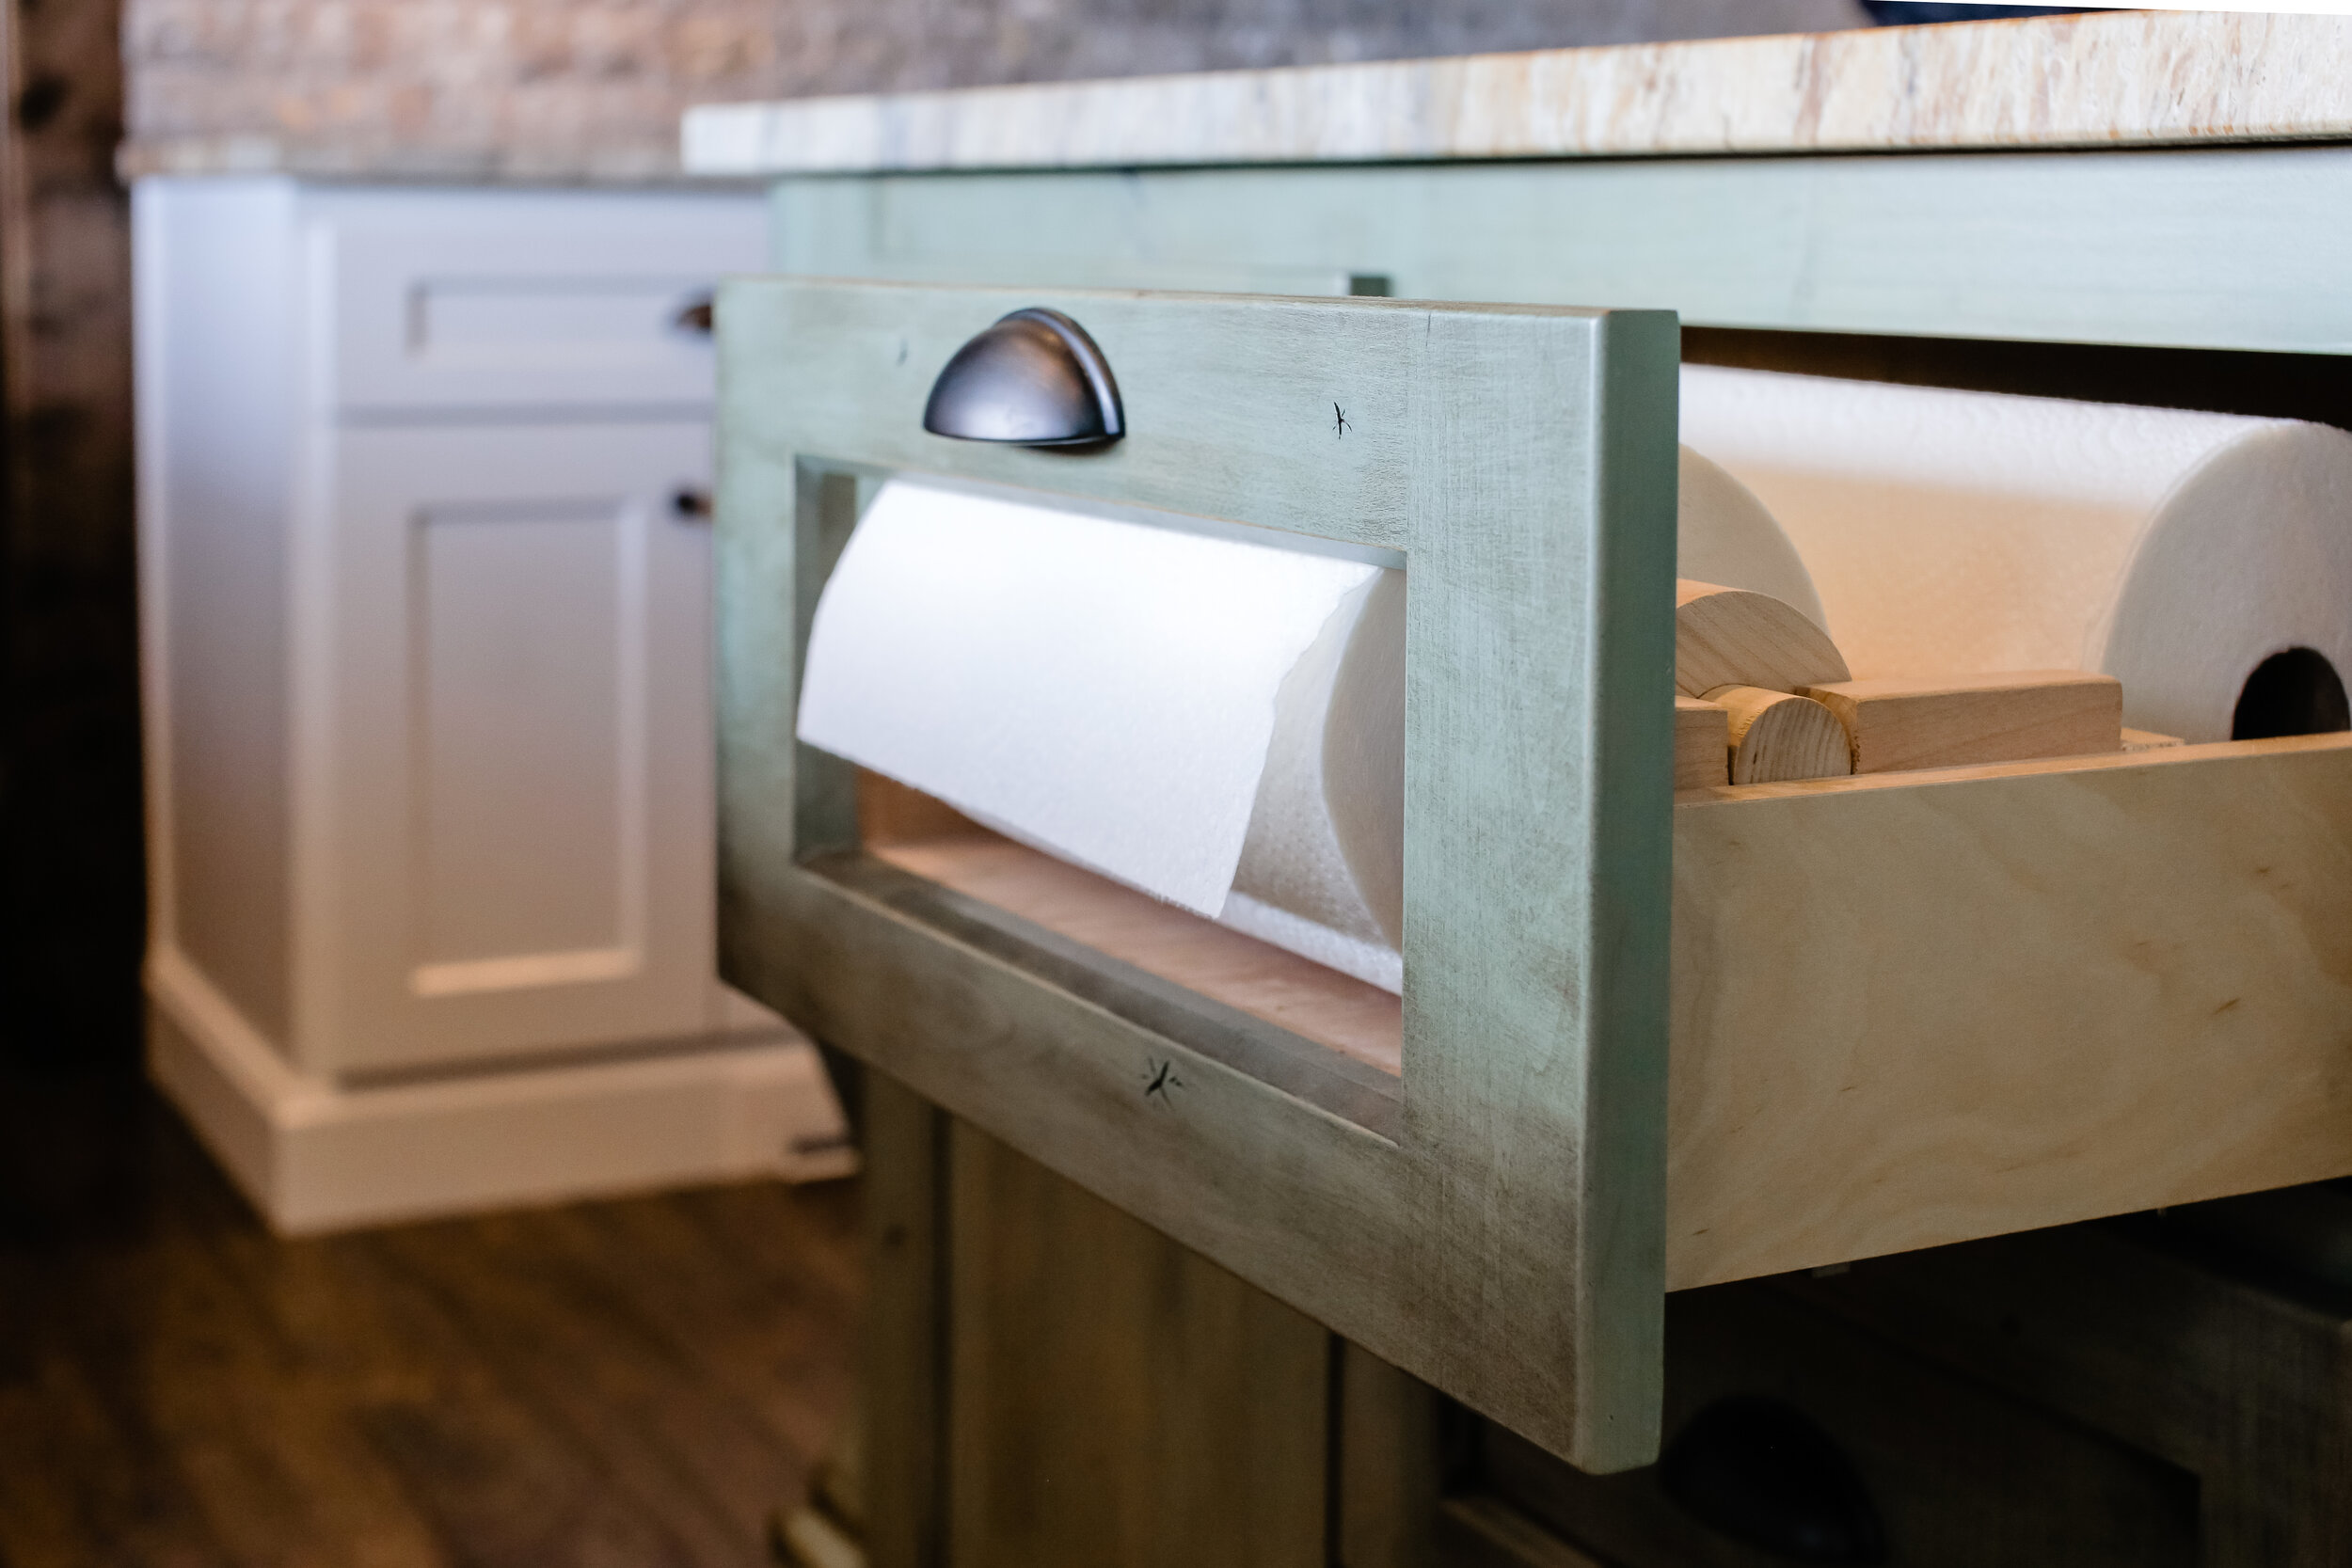 Aha! Hack: Tension Rod as Paper Towel Holder - The Organized Home